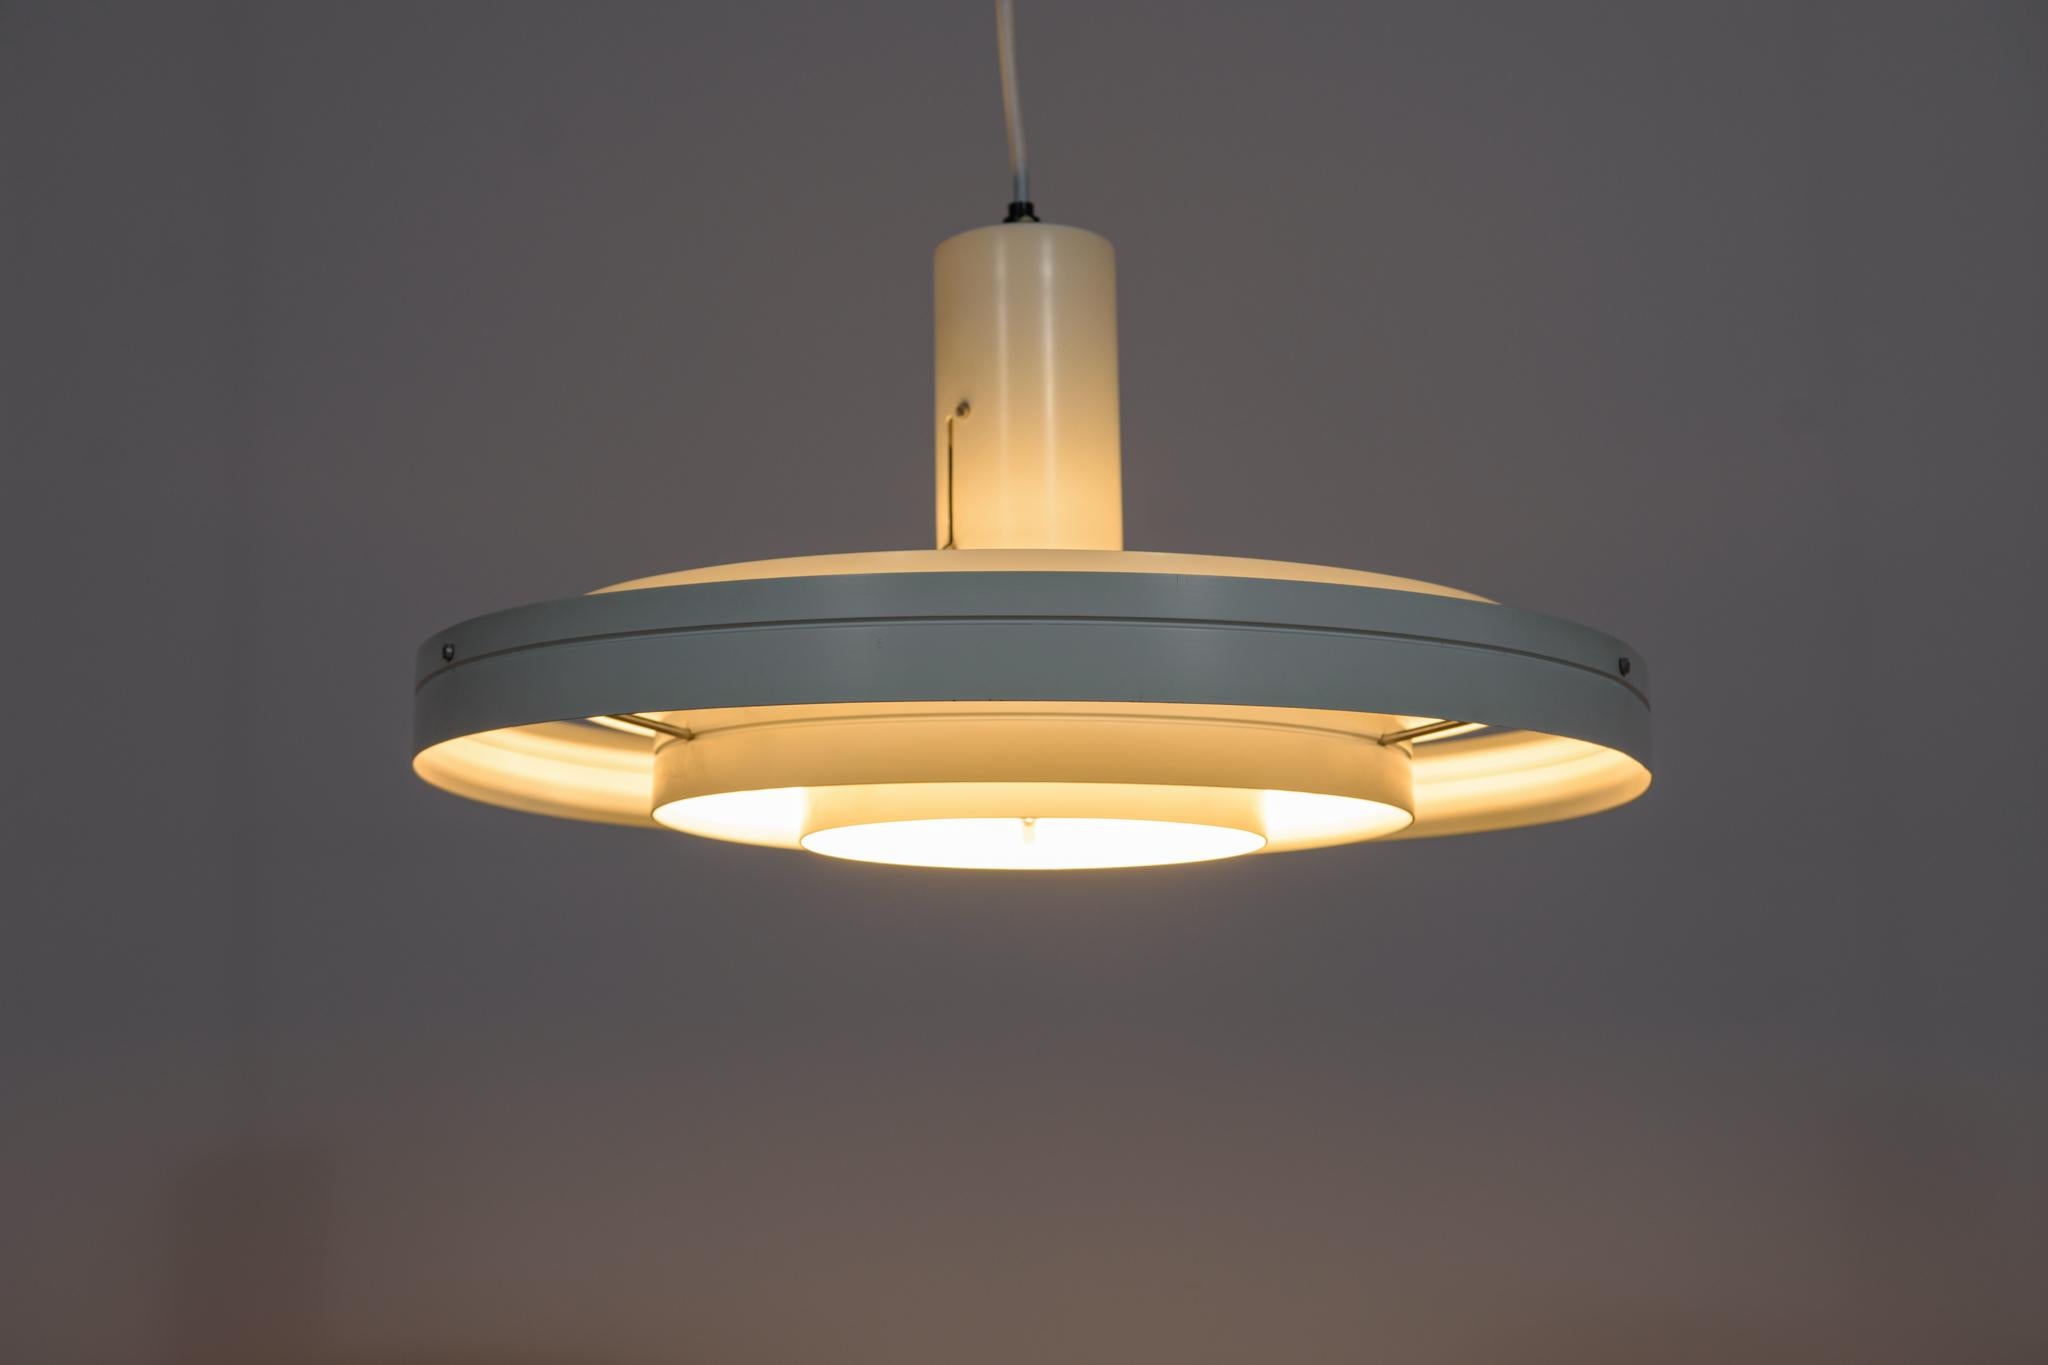 The Fibonacci pendant lamp, designed in the early 1960s by the Danish architect Sophus Frandsen, has become a timeless classic of the legendary Danish lighting company Fog & Mørup. The lamp was produced until the early 1980s until Fog & Mørup closed